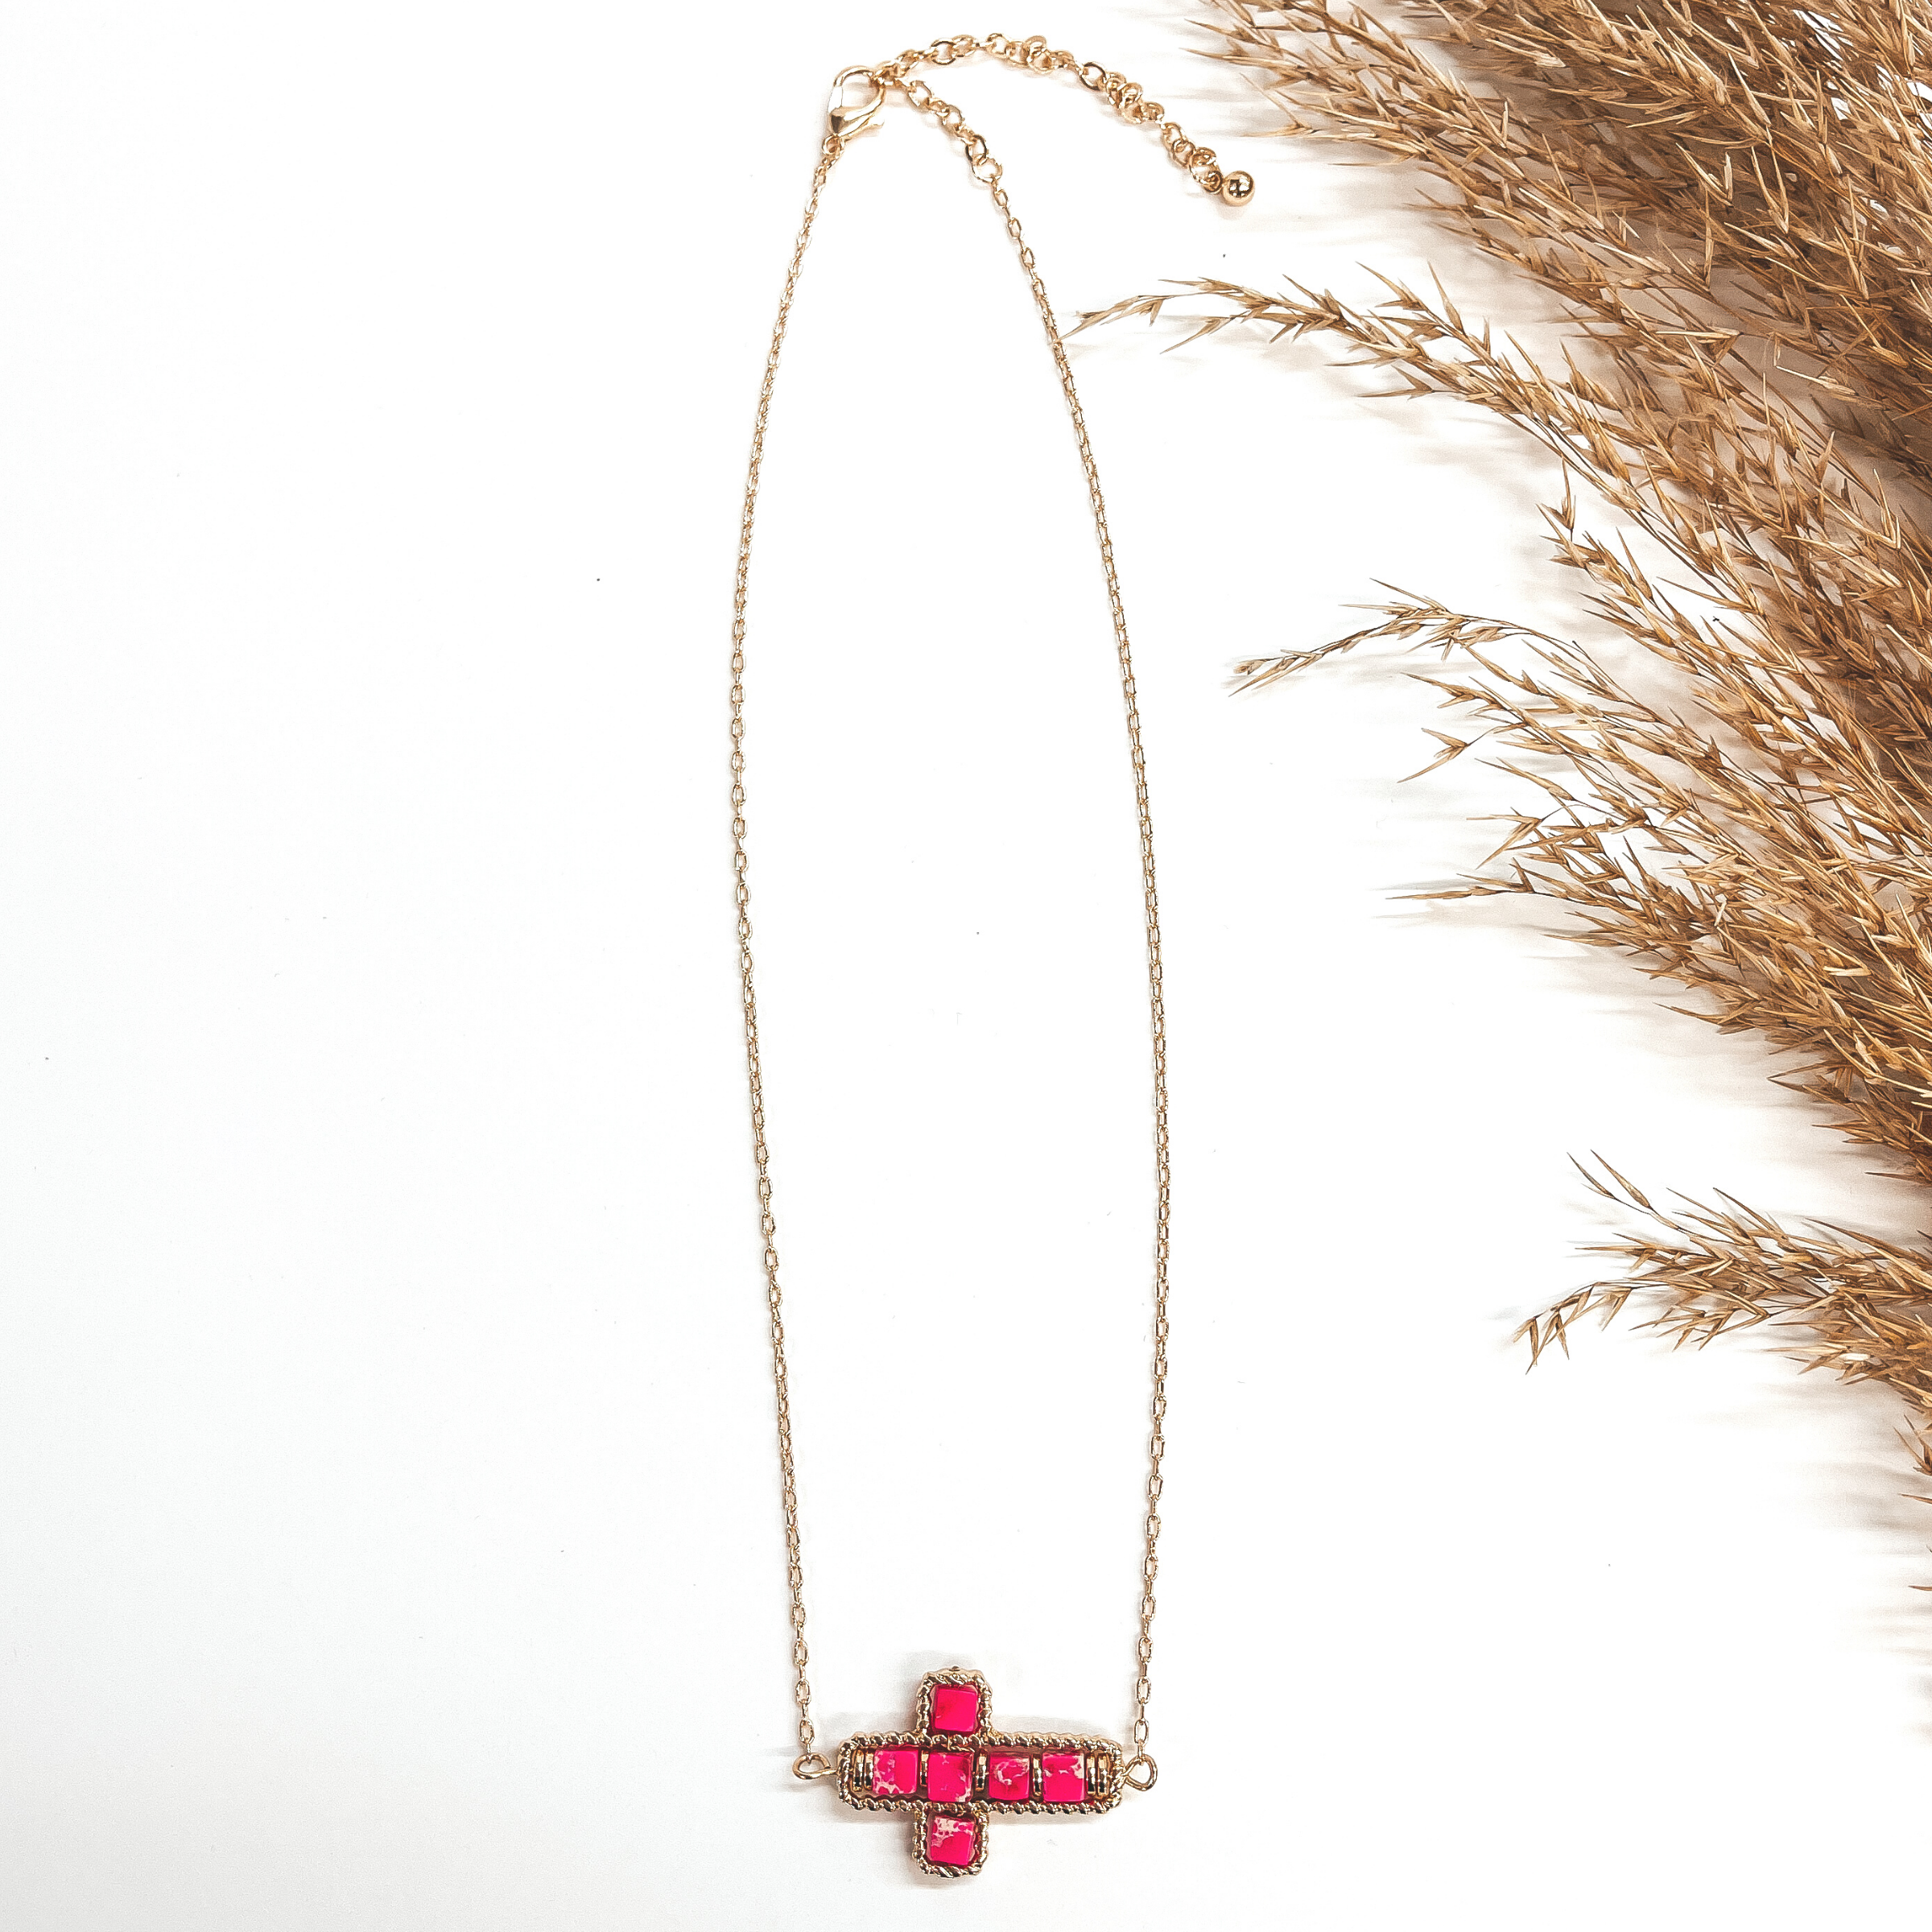 This a gold chain necklace with a cross pendant in  the center. The cross pendant has a gold rope  texture around and has semi- precious stones in  fuchsia. It is taken on a white background and a  brown plant in the side as decor.